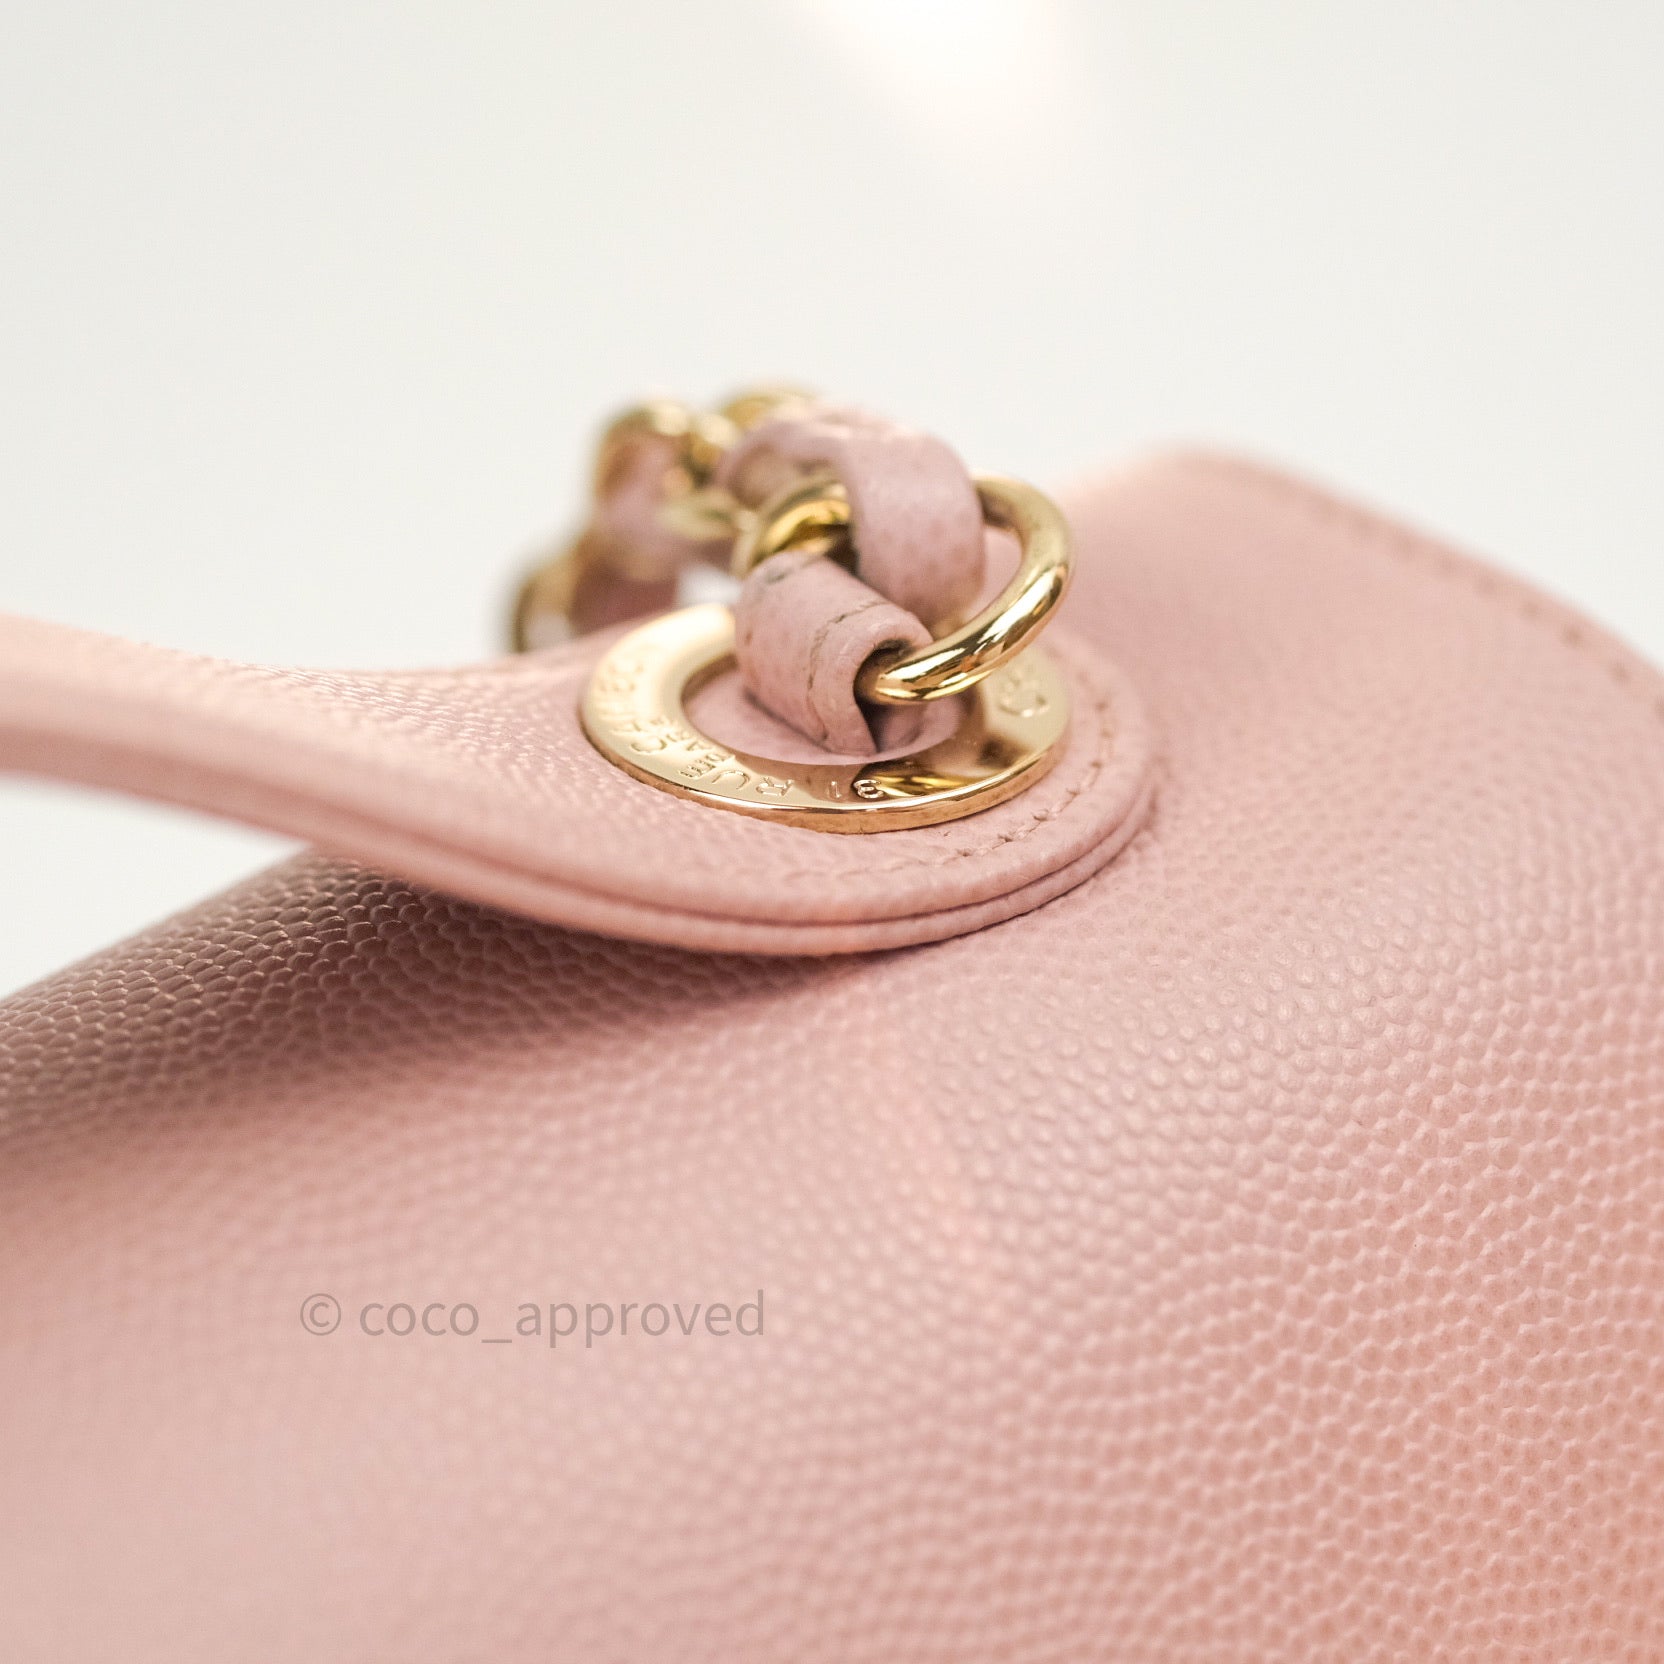 Chanel Business Affinity Flap Bag Light Pink Caviar Large at